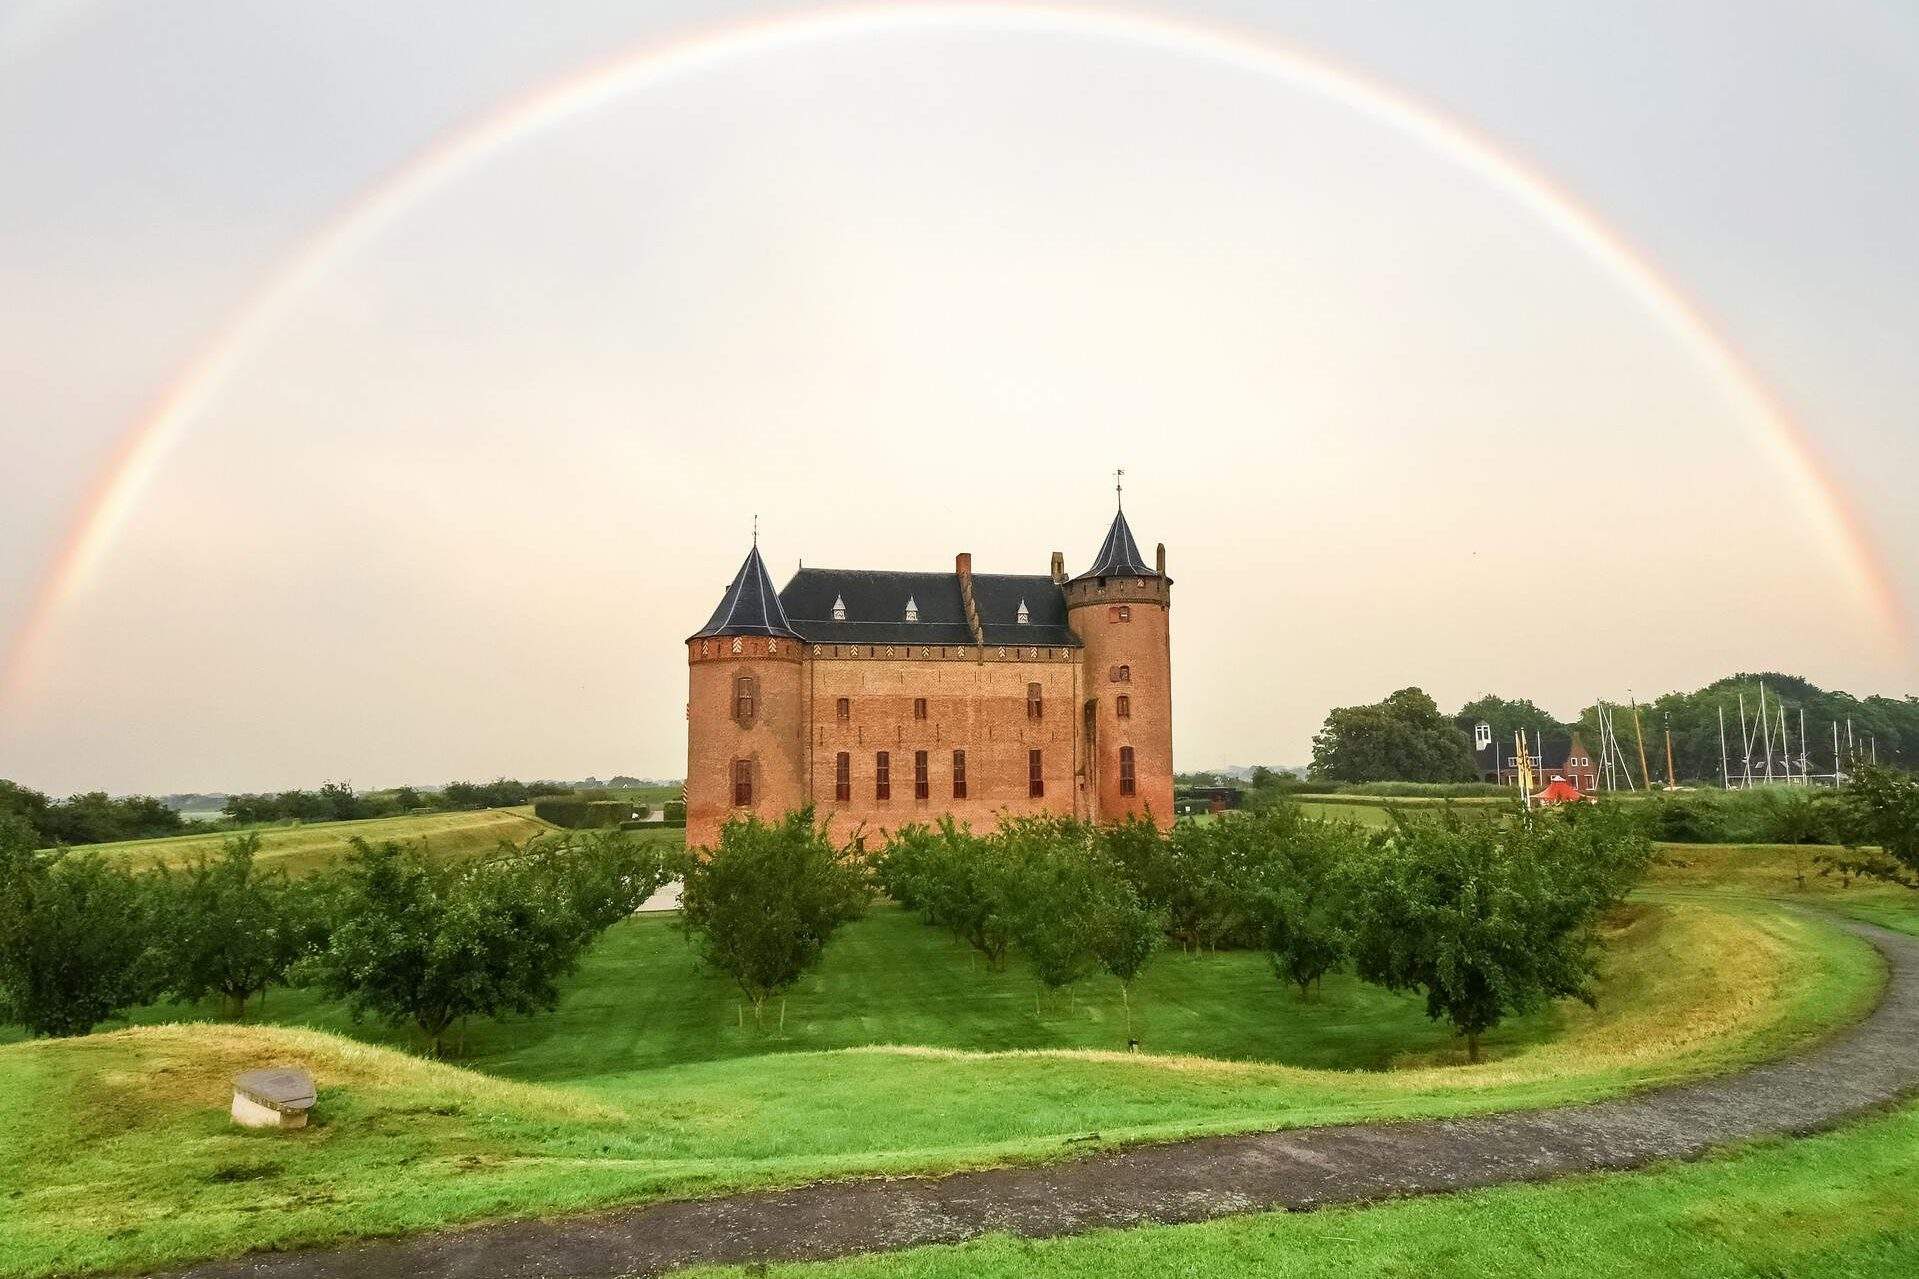 An enchanting rainbow forms an arch above the castle in a grassland.